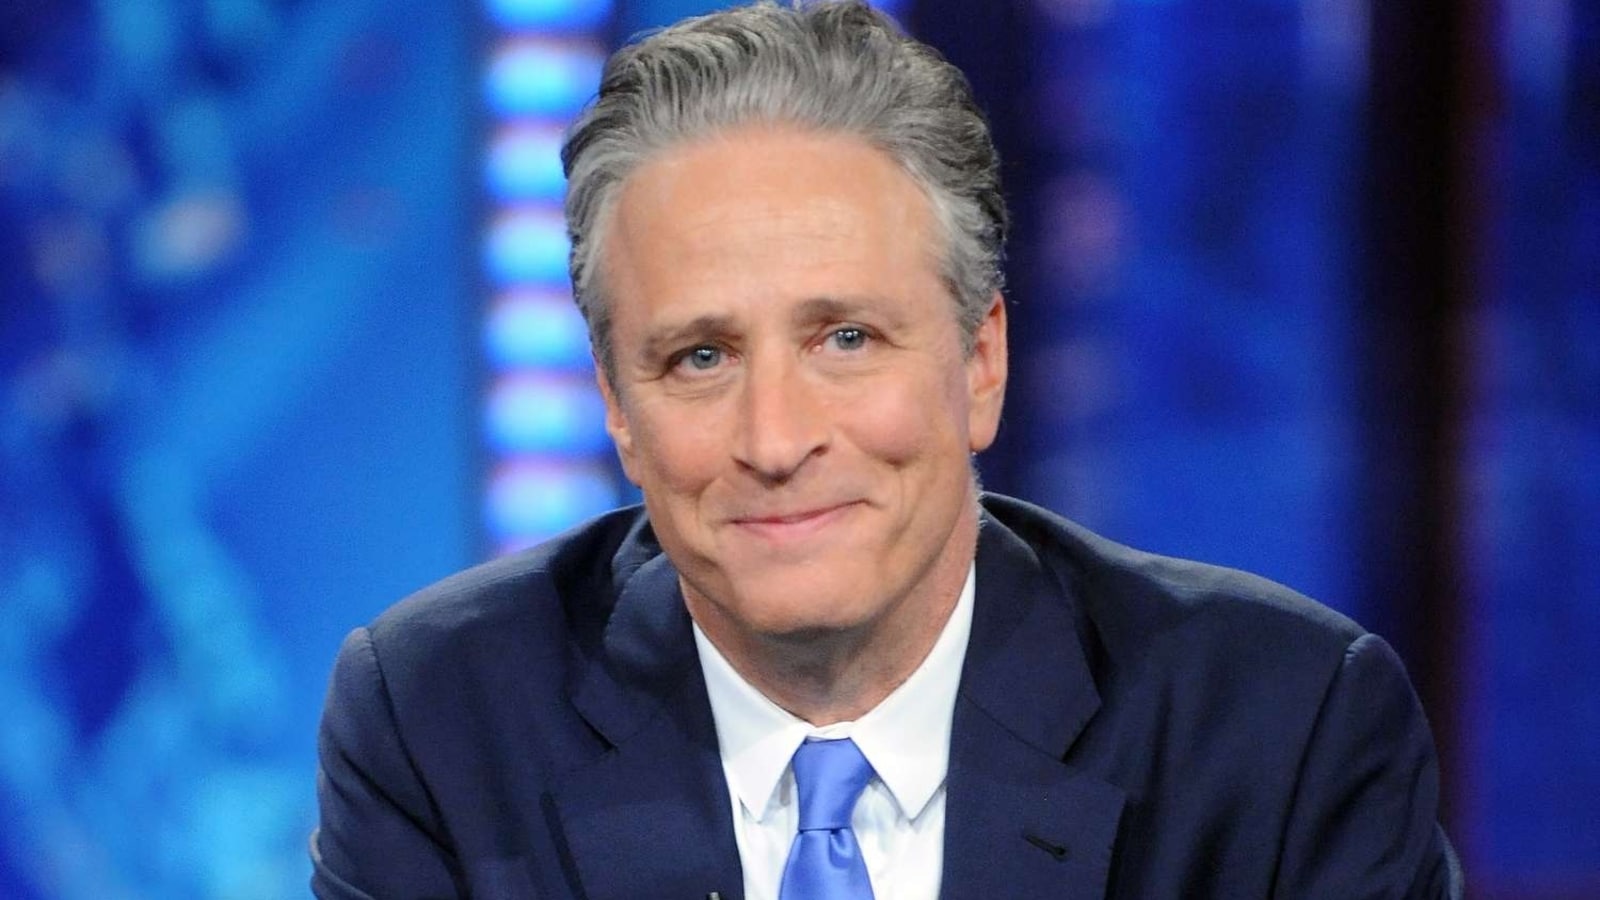 Jon Stewart set to return to The Daily Show as exec producer and weekly host